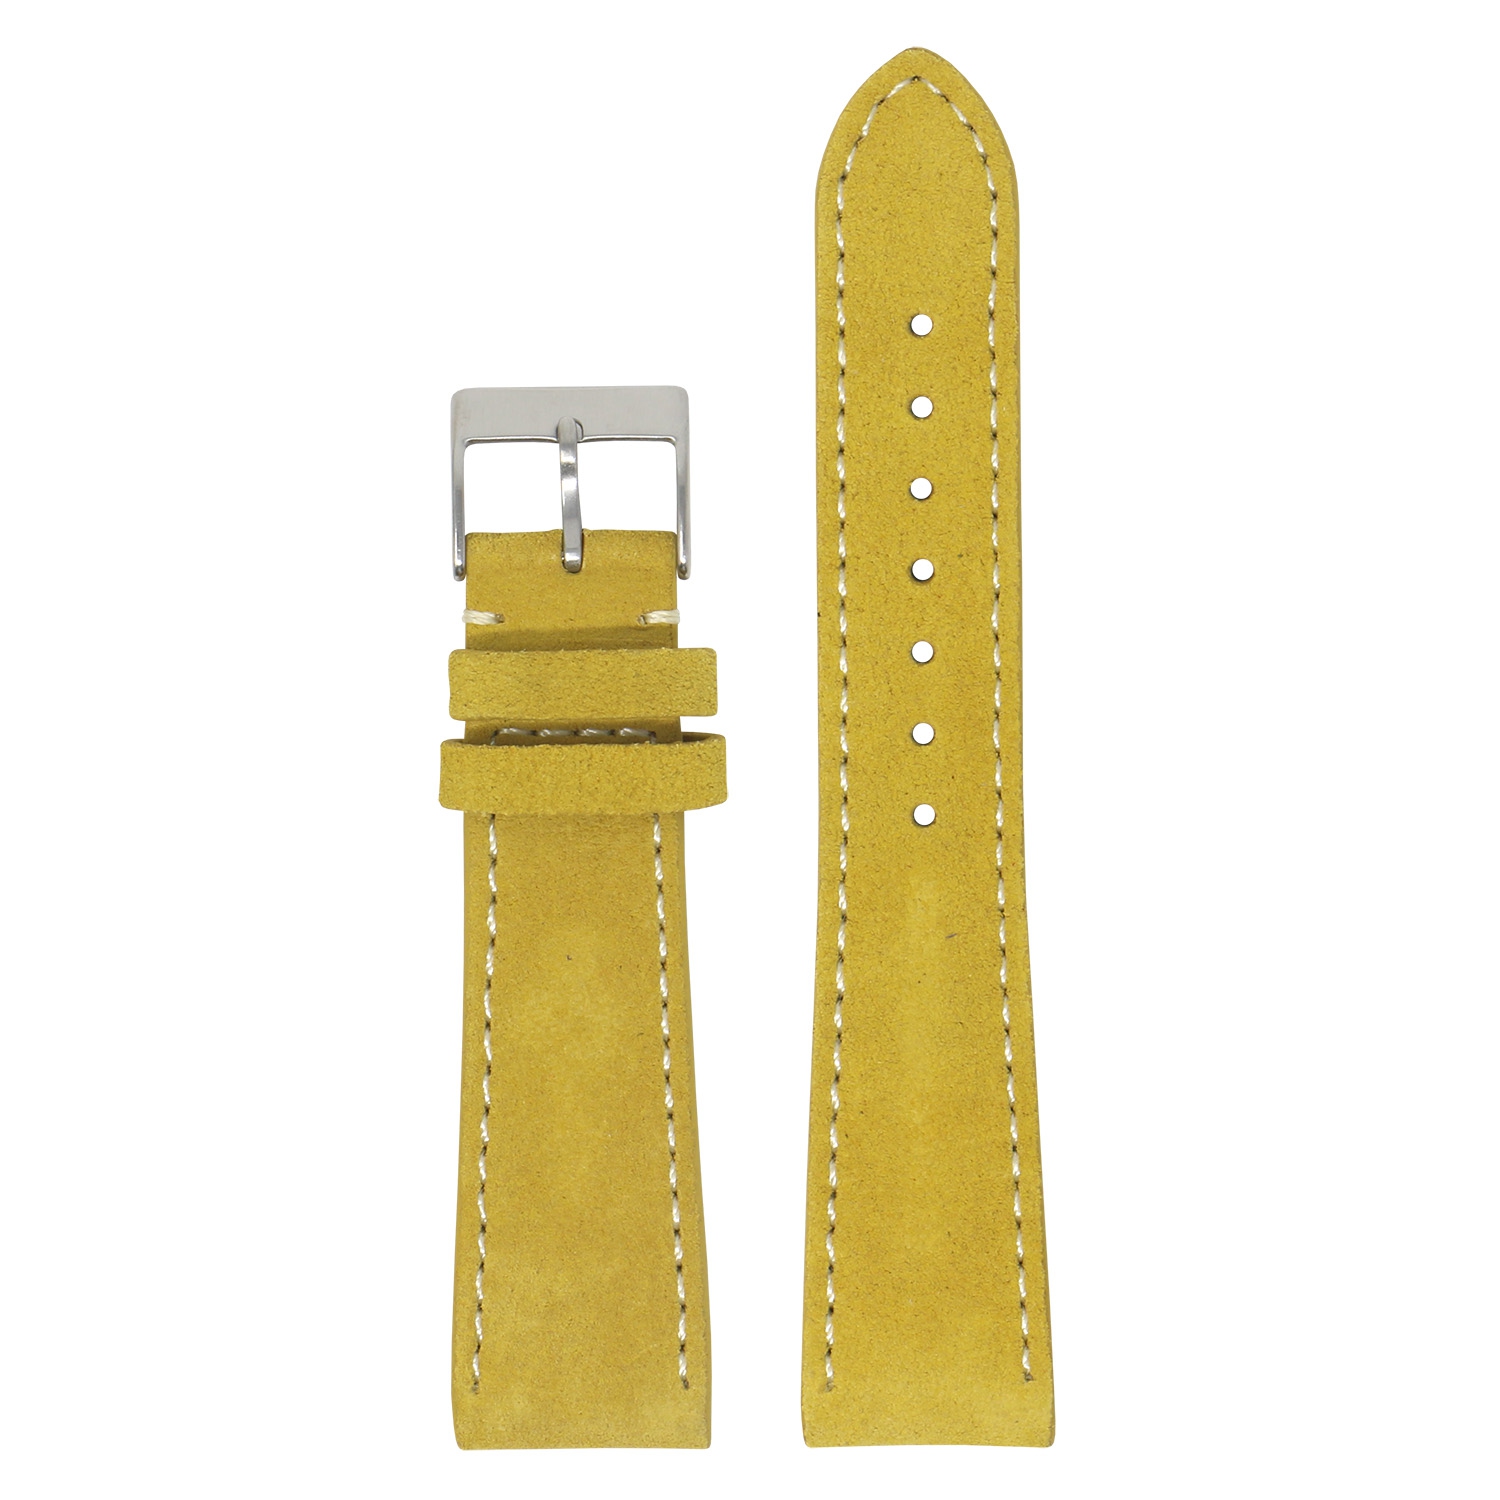 StrapsCo Classic Suede (Short, Standard, Long) Watch Band Strap for Samsung Galaxy Watch 3 - Short Length - 22mm - For 45mm Galaxy Watch3 - Yellow